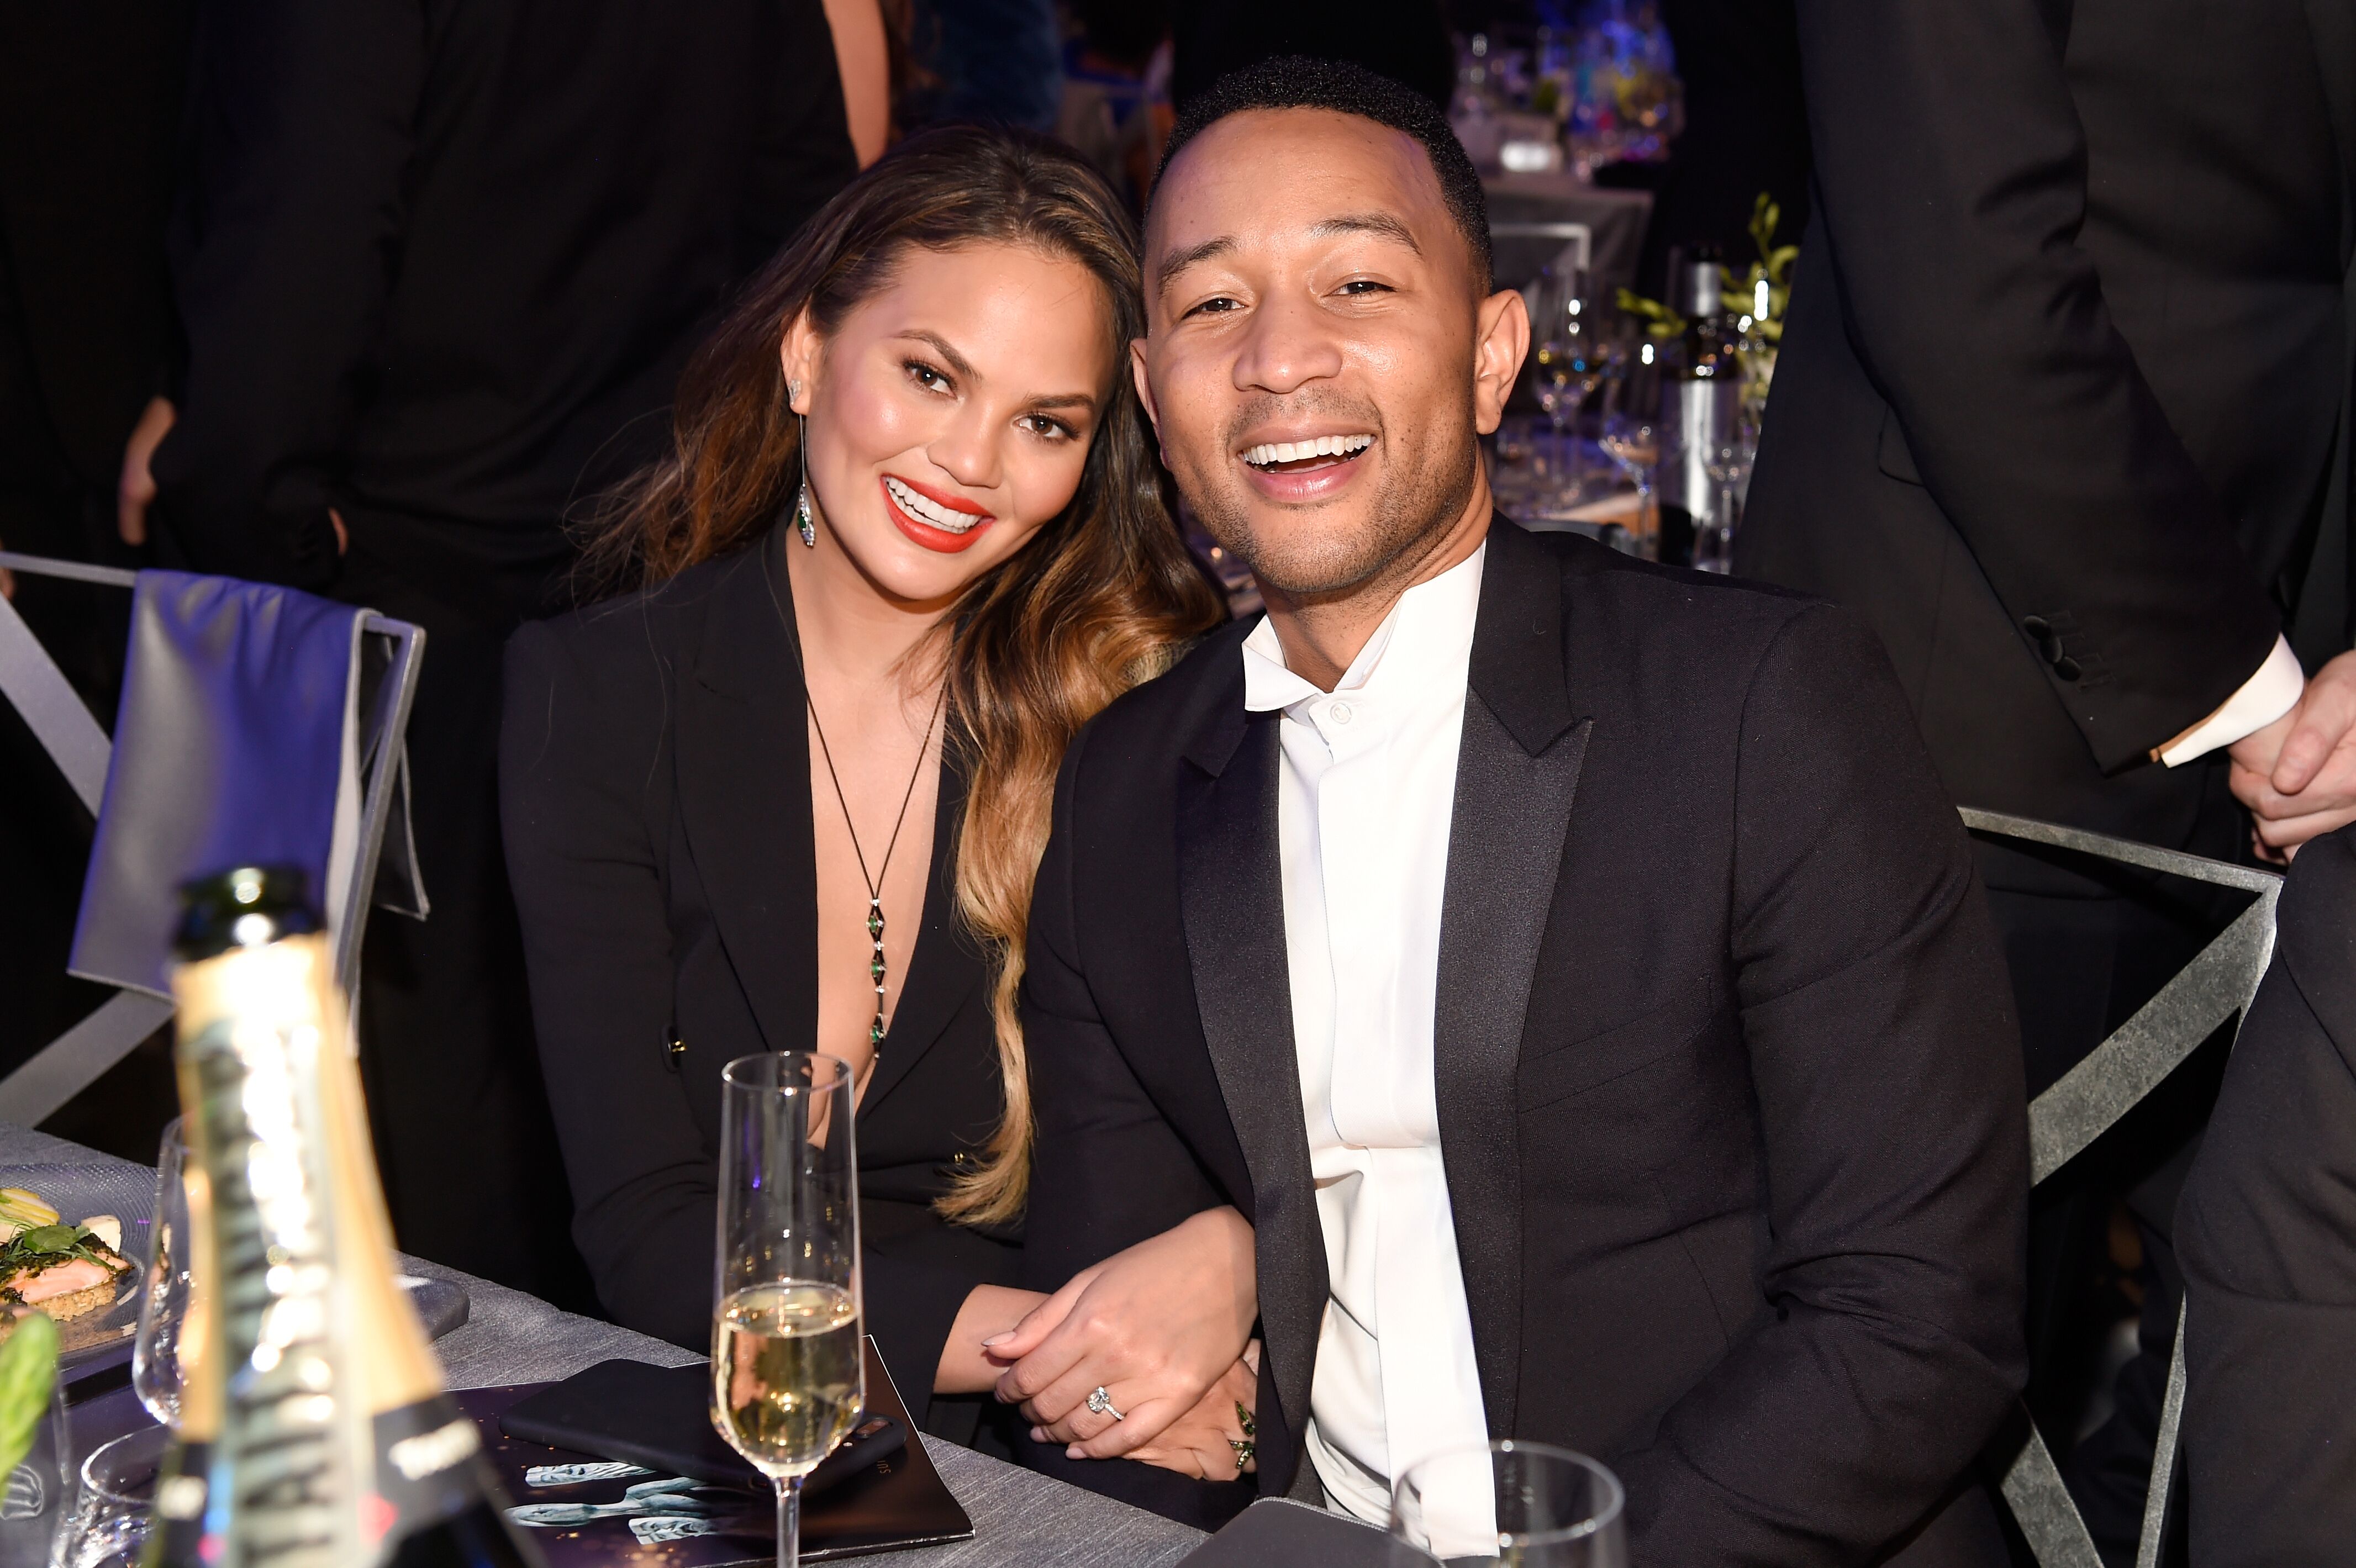 Chrissy Teigen and husband John Legend at the 23rd Annual Screen Actors Guild Awards  at The Shrine Expo Hall on January 29, 2017 in Los Angeles, California. | Photo: Getty Images